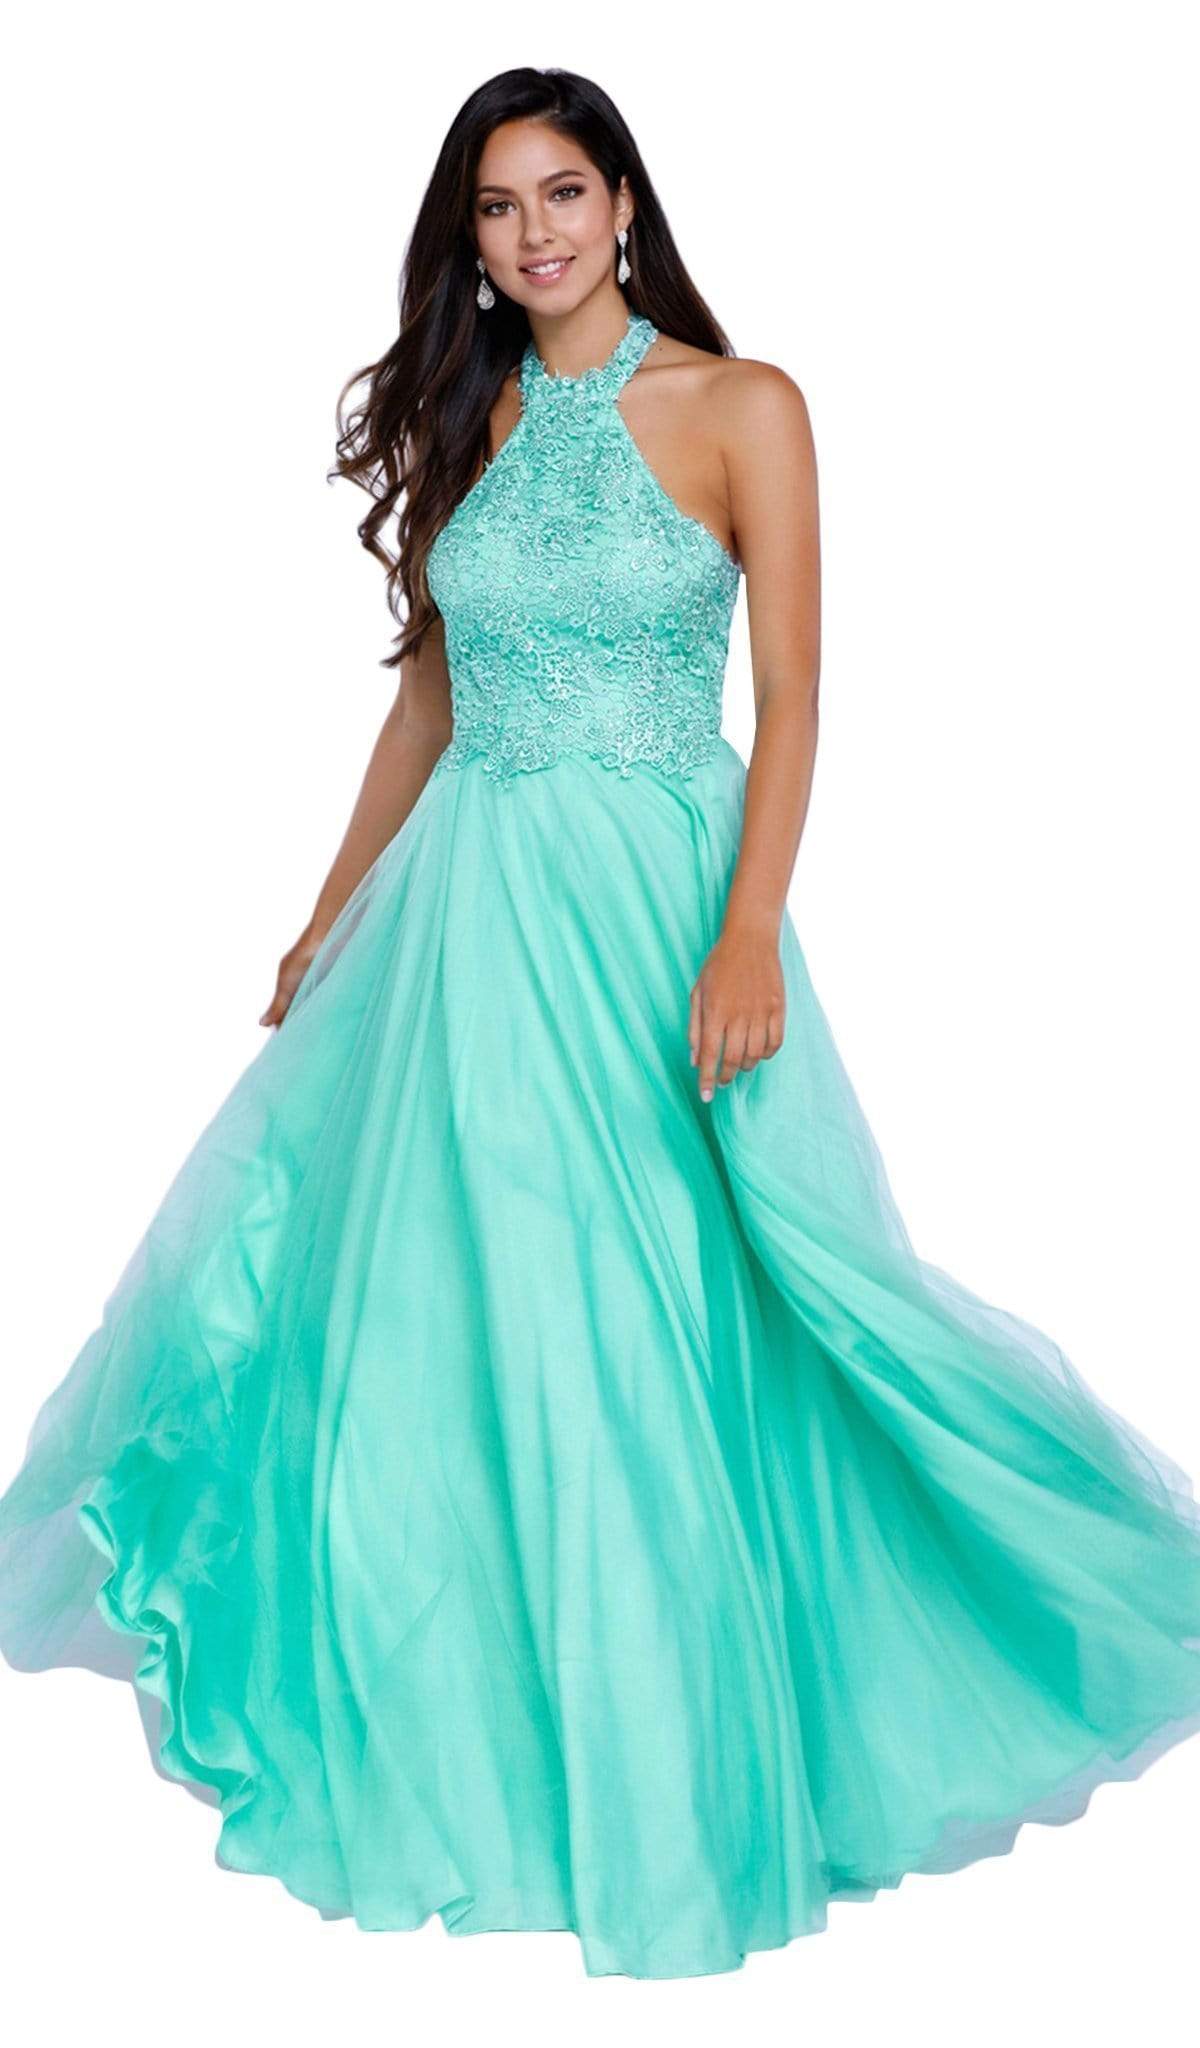 Nox Anabel - 8181 Lace Embroidered Bodice Halter Long Gown Special Occasion Dress XS / Mint Green